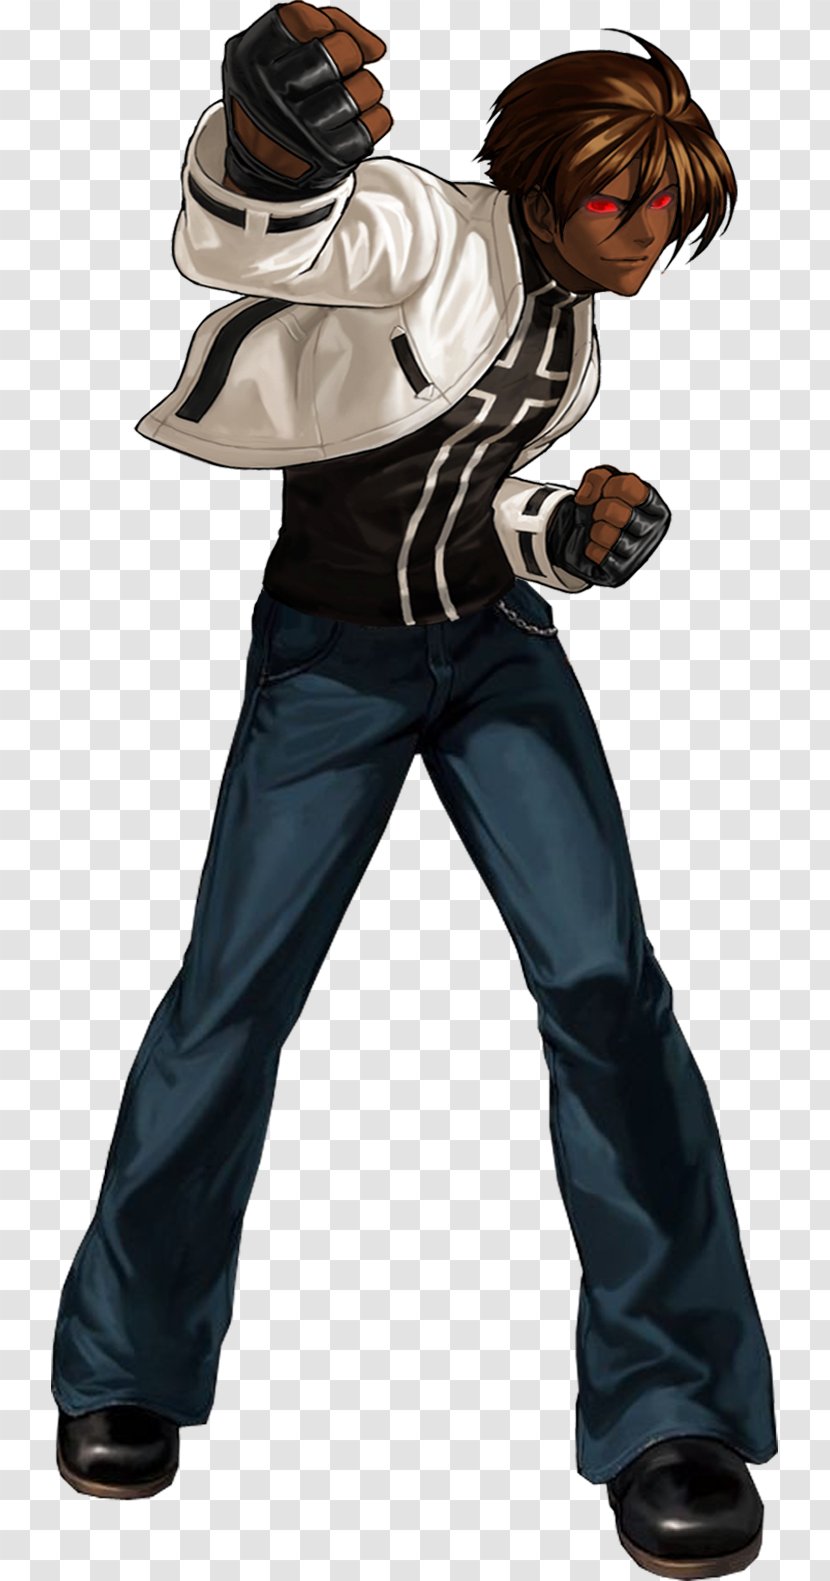 The King Of Fighters XIII Kyo Kusanagi Iori Yagami '97 - Xiii - 2002 Unlimited Match Transparent PNG